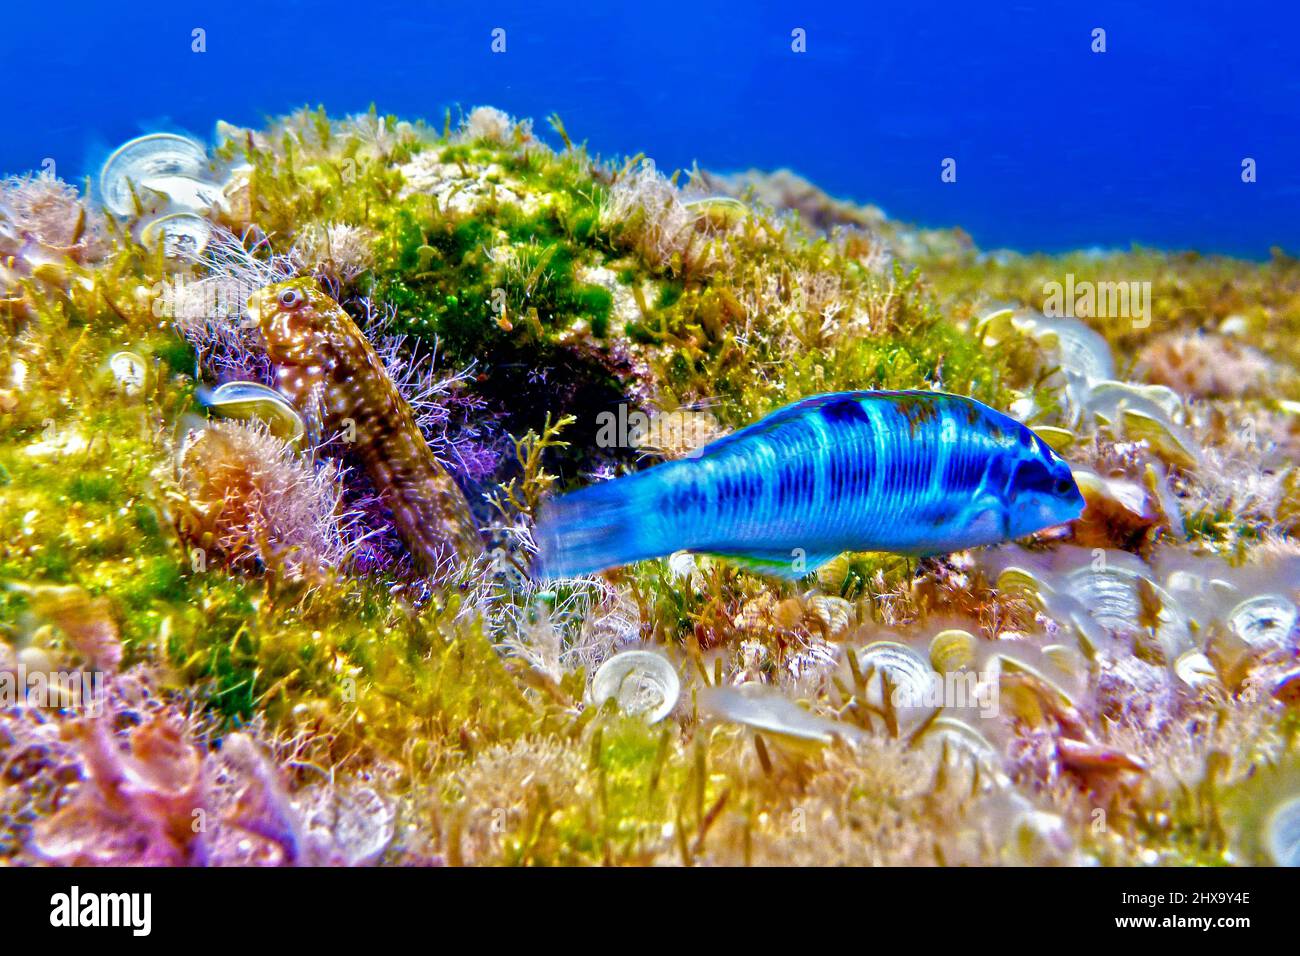 Blue Peacock Wrasse and Blenny macro detail Stock Photo